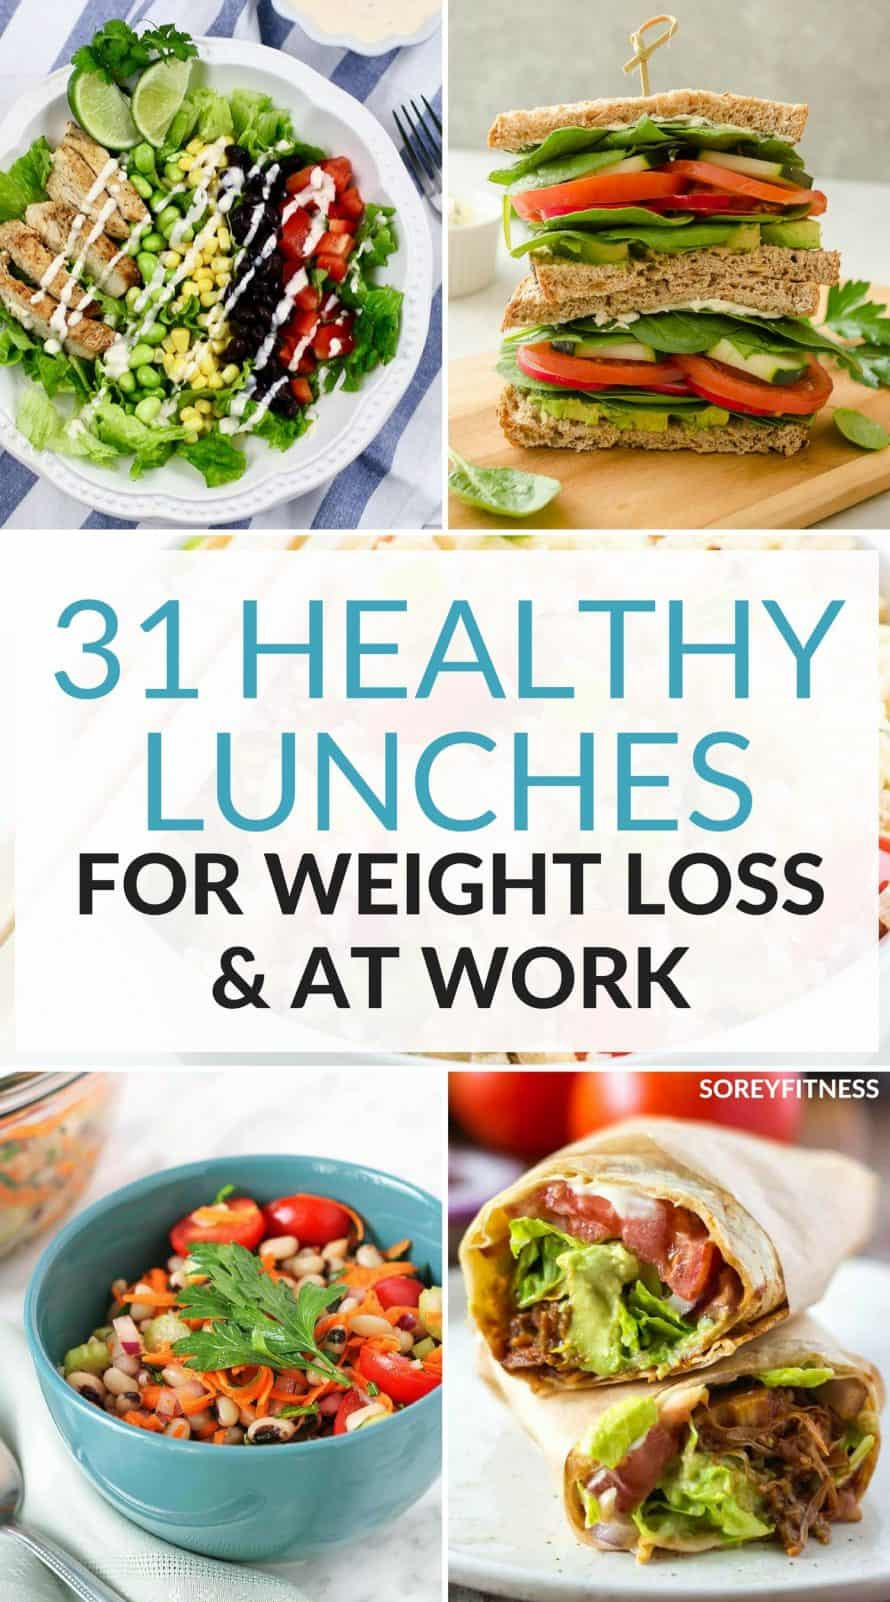 Easy Healthy Lunches
 31 Healthy Lunch Ideas For Weight Loss Easy Meals for